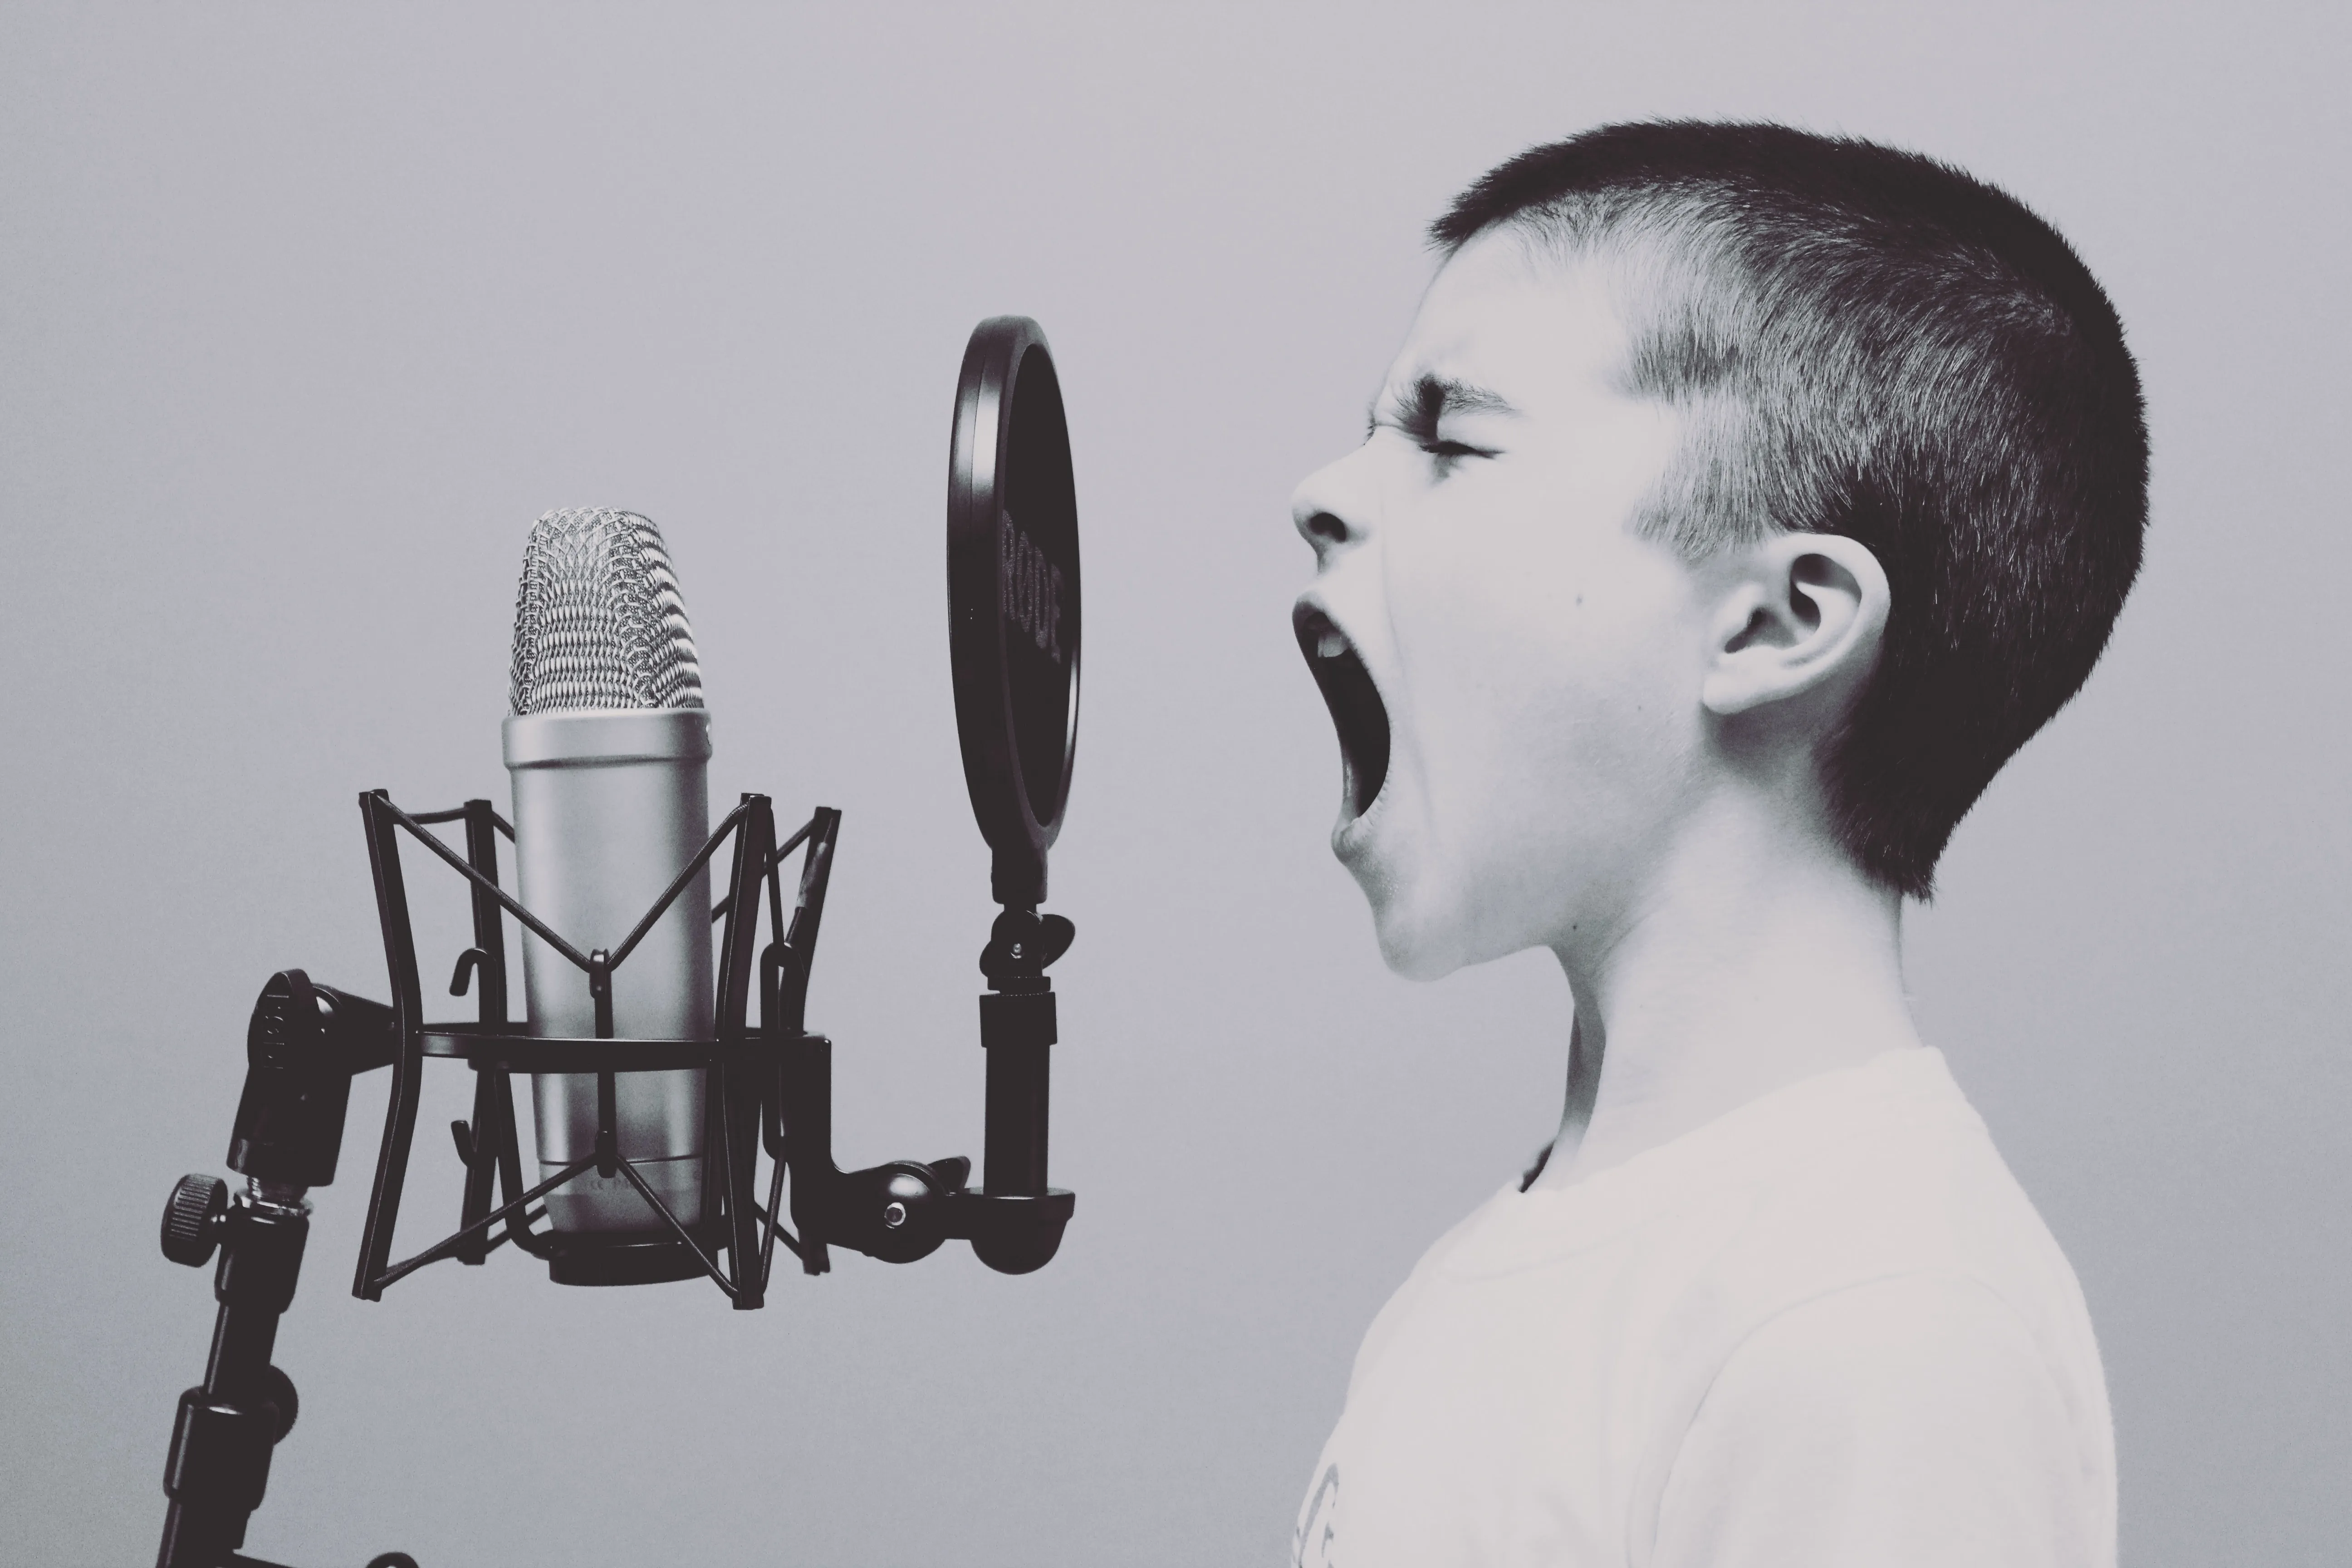 Boy shouting into a microphone